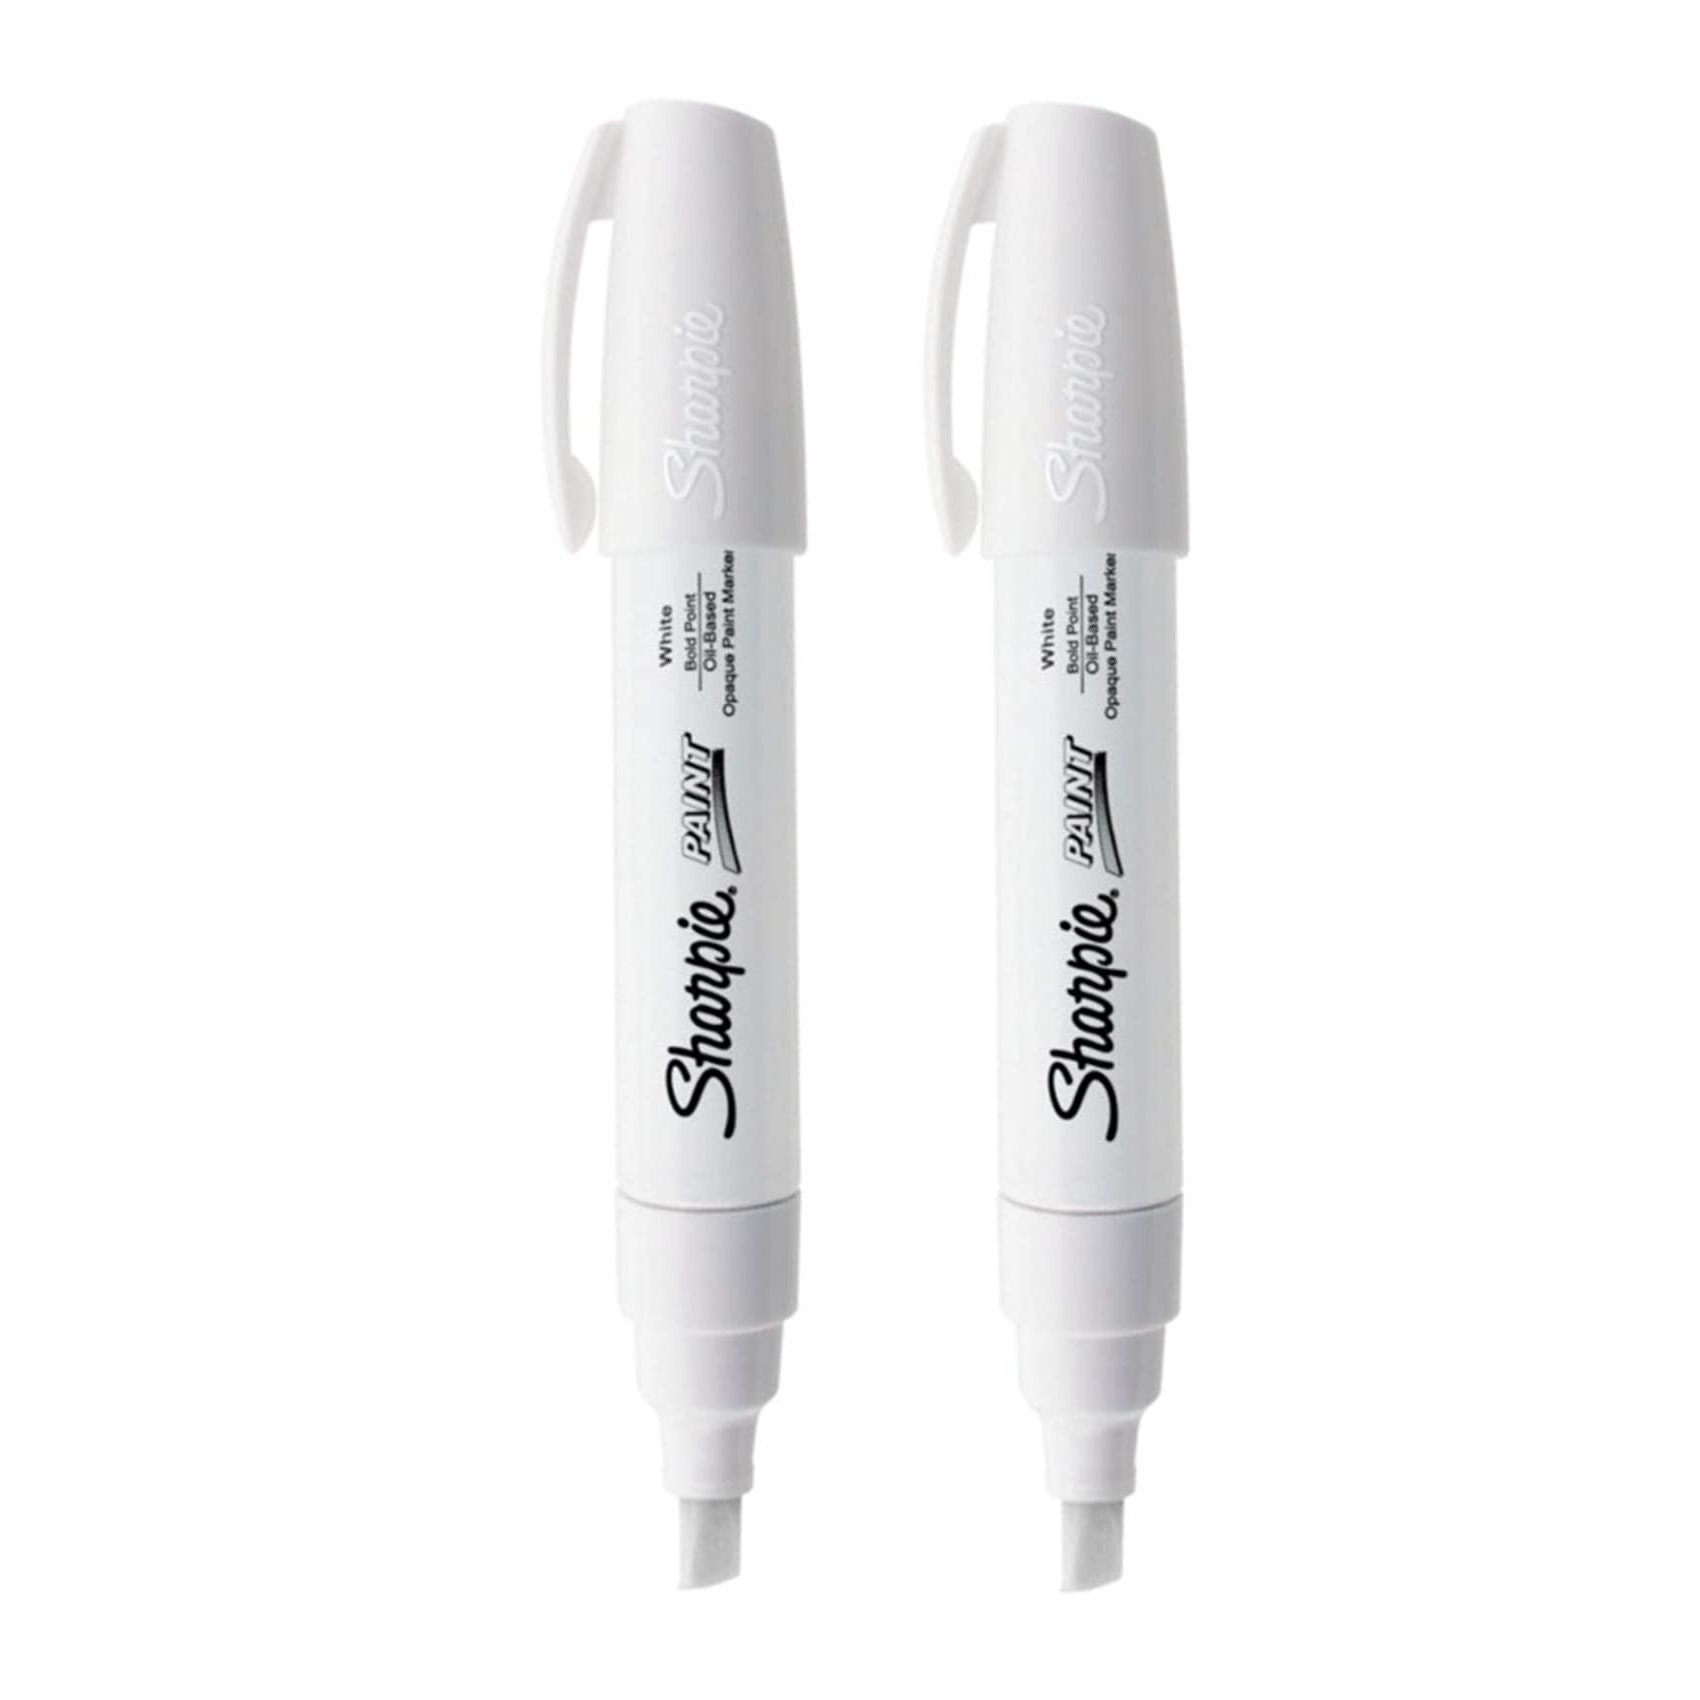 White Sharpie Paint Markers Oil Based One Each of Extra Fine, Fine, Medium  & Bold Point, Tip Sharpie Paint Markers, Pens 